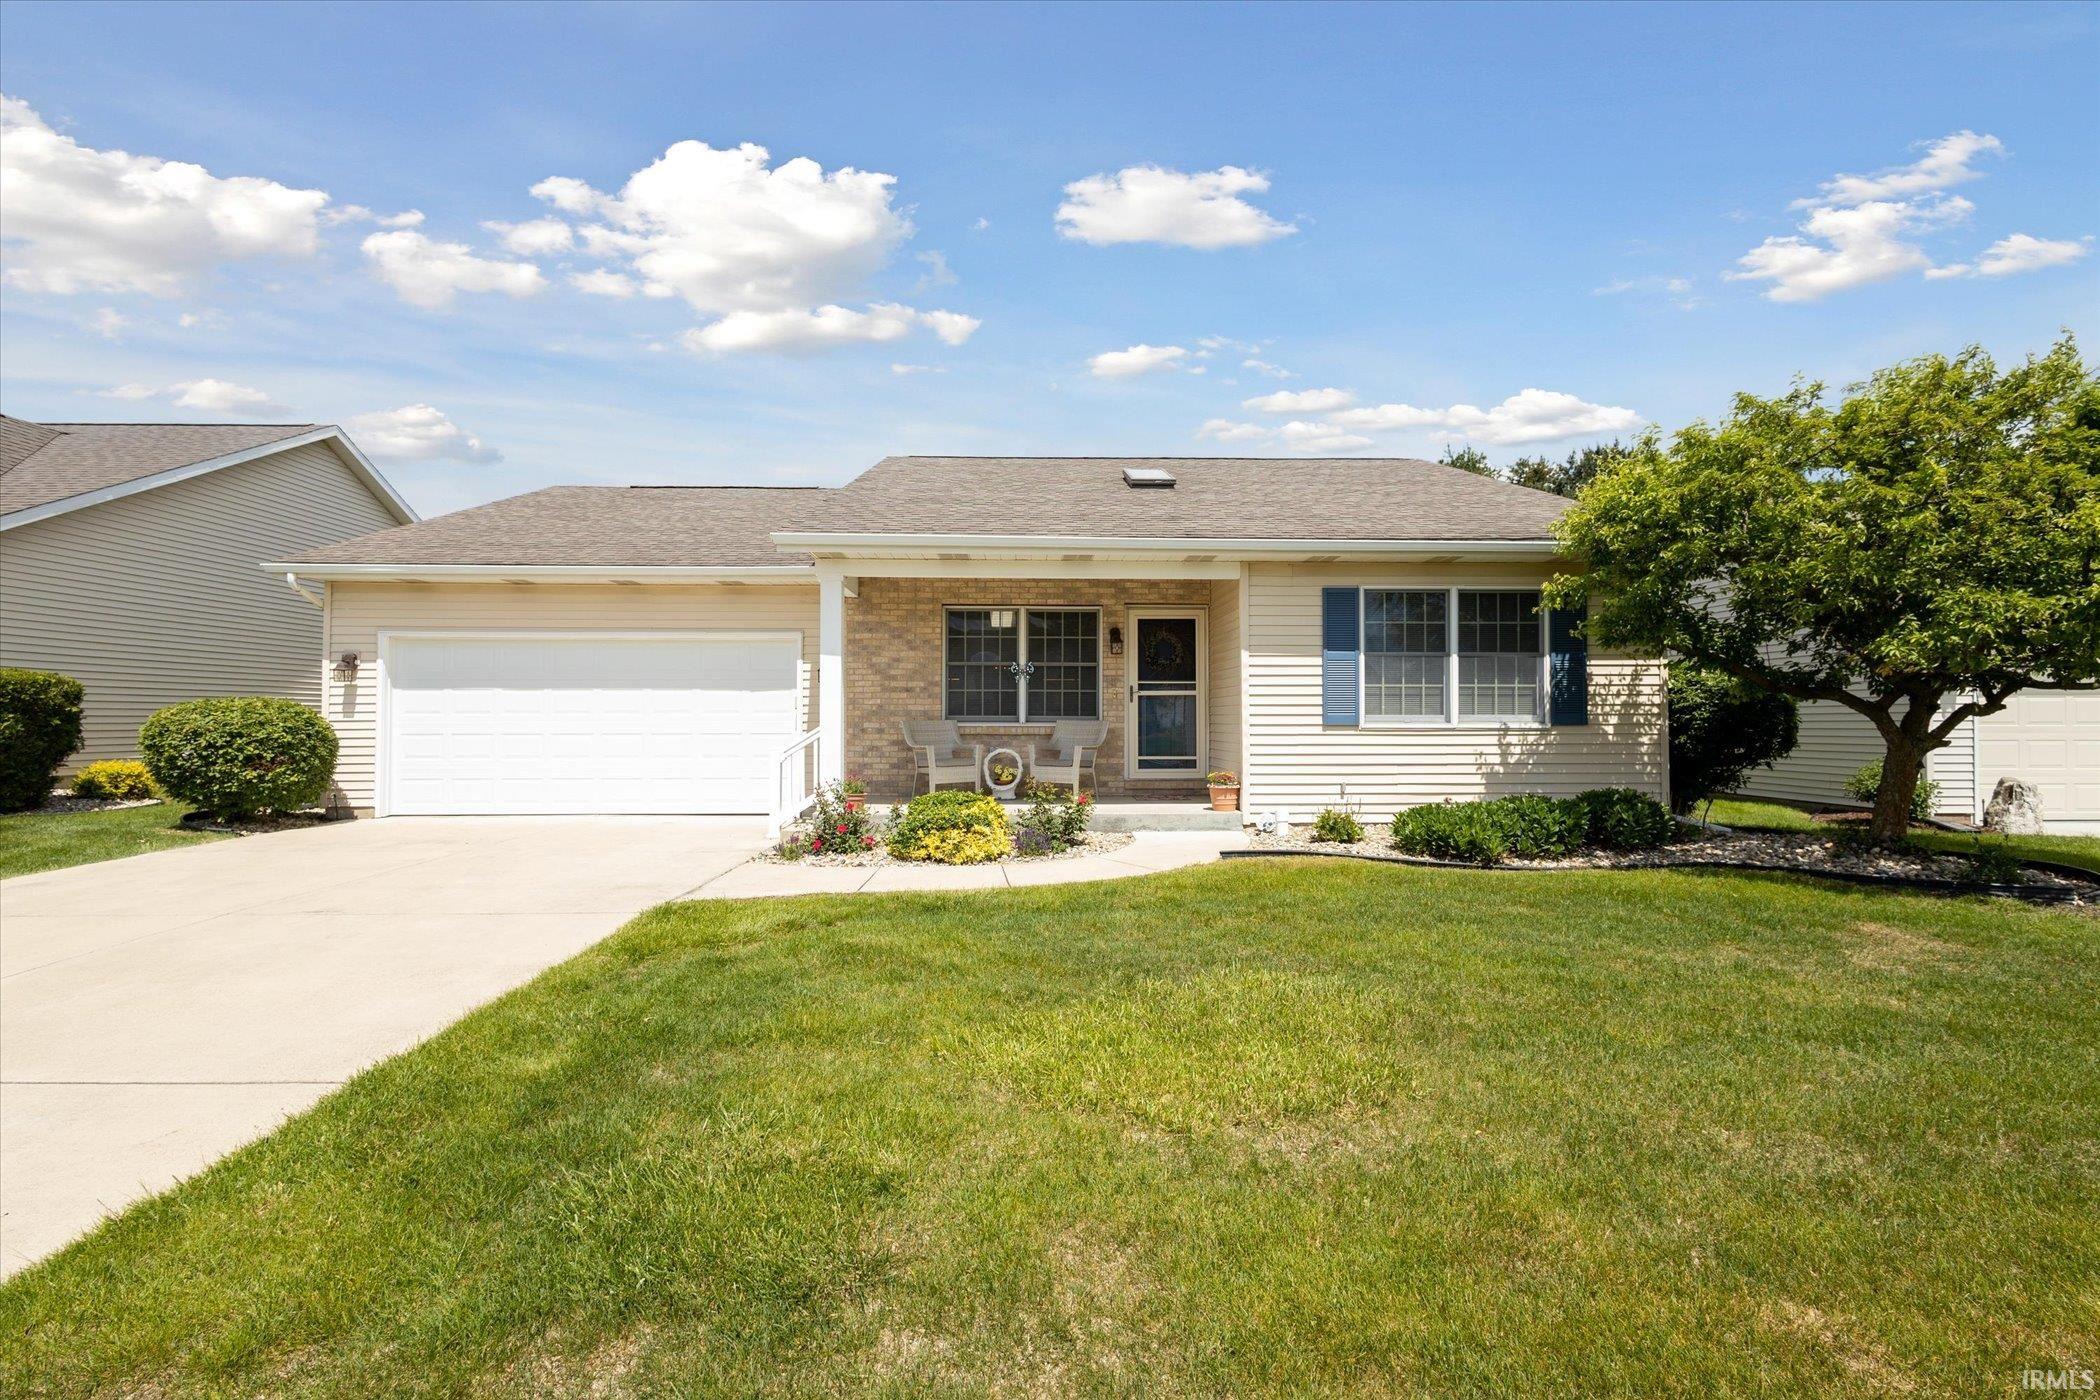 5178 Finch Drive, South Bend, IN 46614